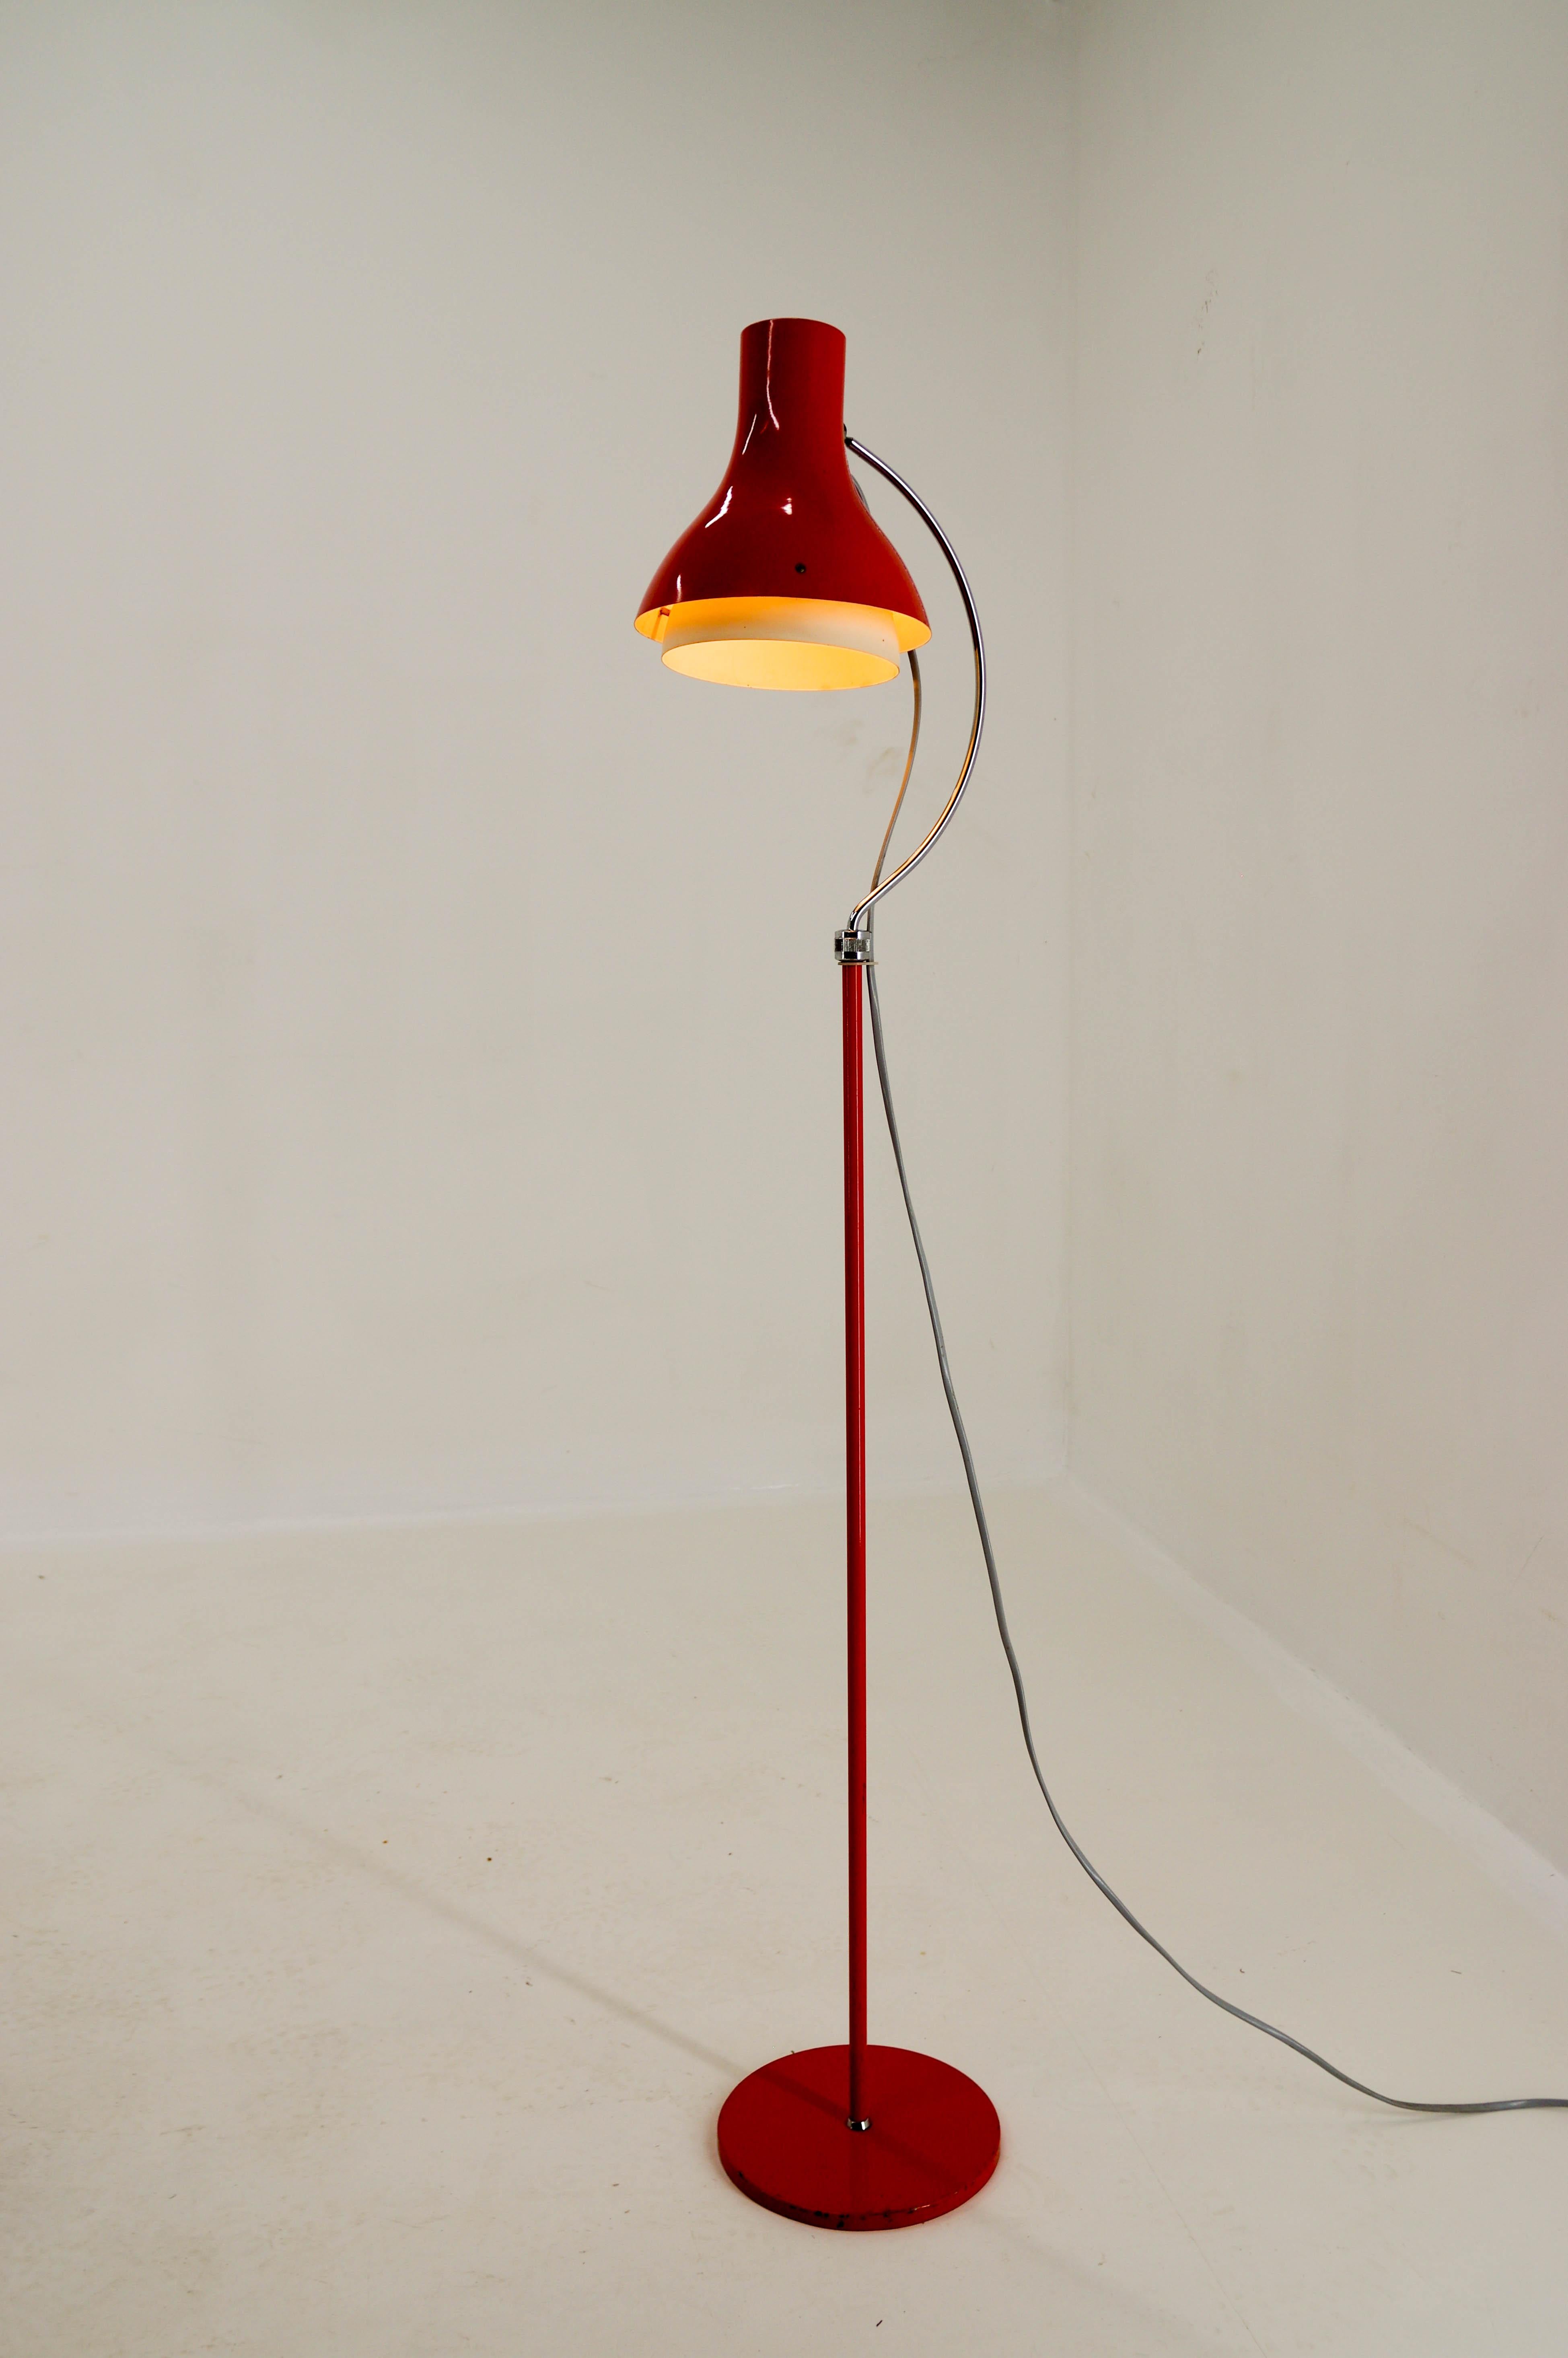 Very good original condition, repolished.
Adjustable height: max. 178cm, min. 136cm
1xE27 or E26 bulb, max 60W.